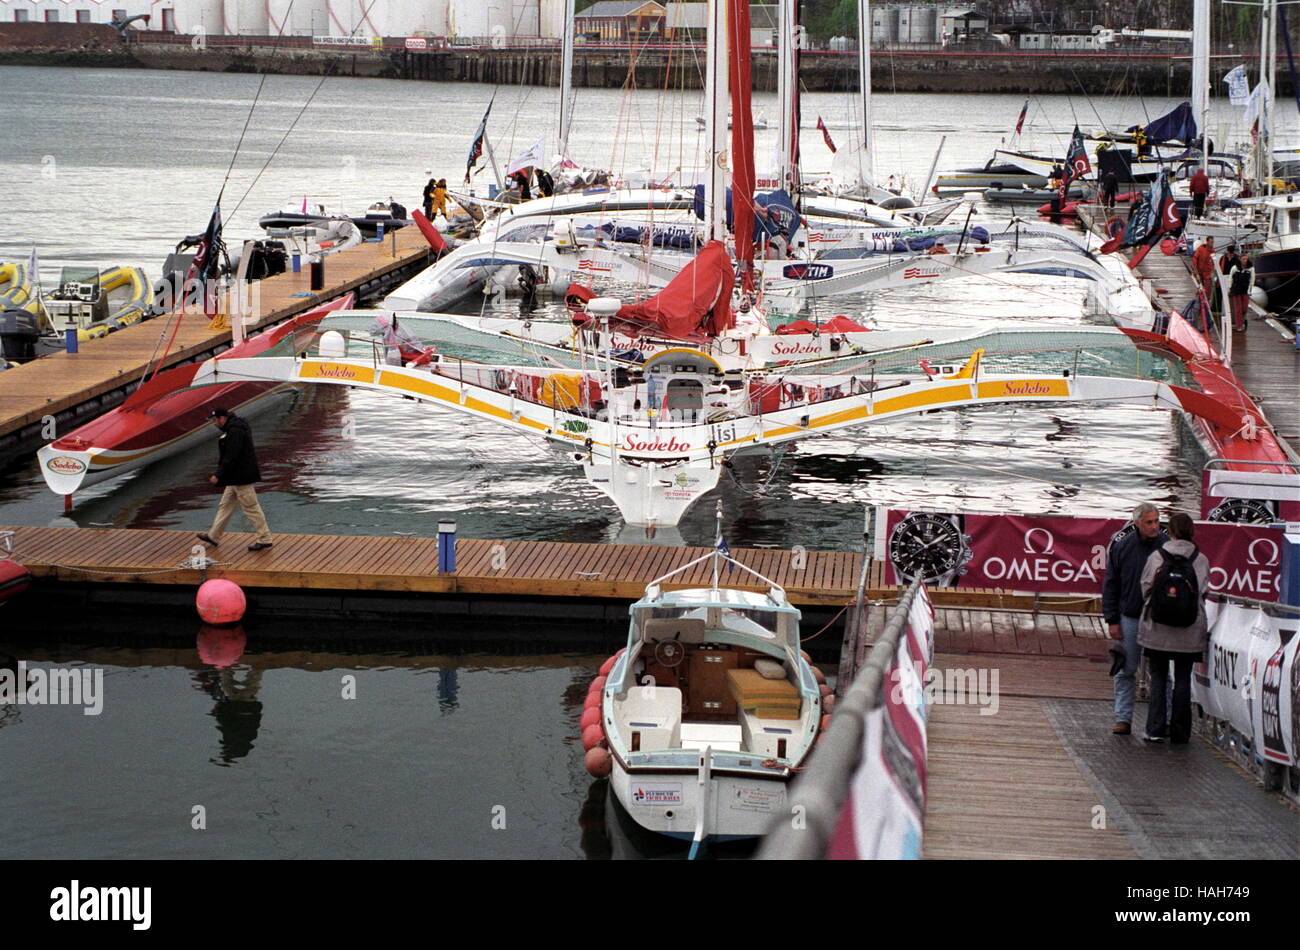 AJAX NEWS PHOTOS. 31ST MAY 2004. PLYMOUTH, ENGLAND. - TRANSAT YACHT RACE - MULTIHULLS MOORED IN QUEN ANNE'S BATTERY MARINA BEFORE THE START. PHOTO:JONATHAN EASTLAND/AJAX  REF:43105 4 Stock Photo